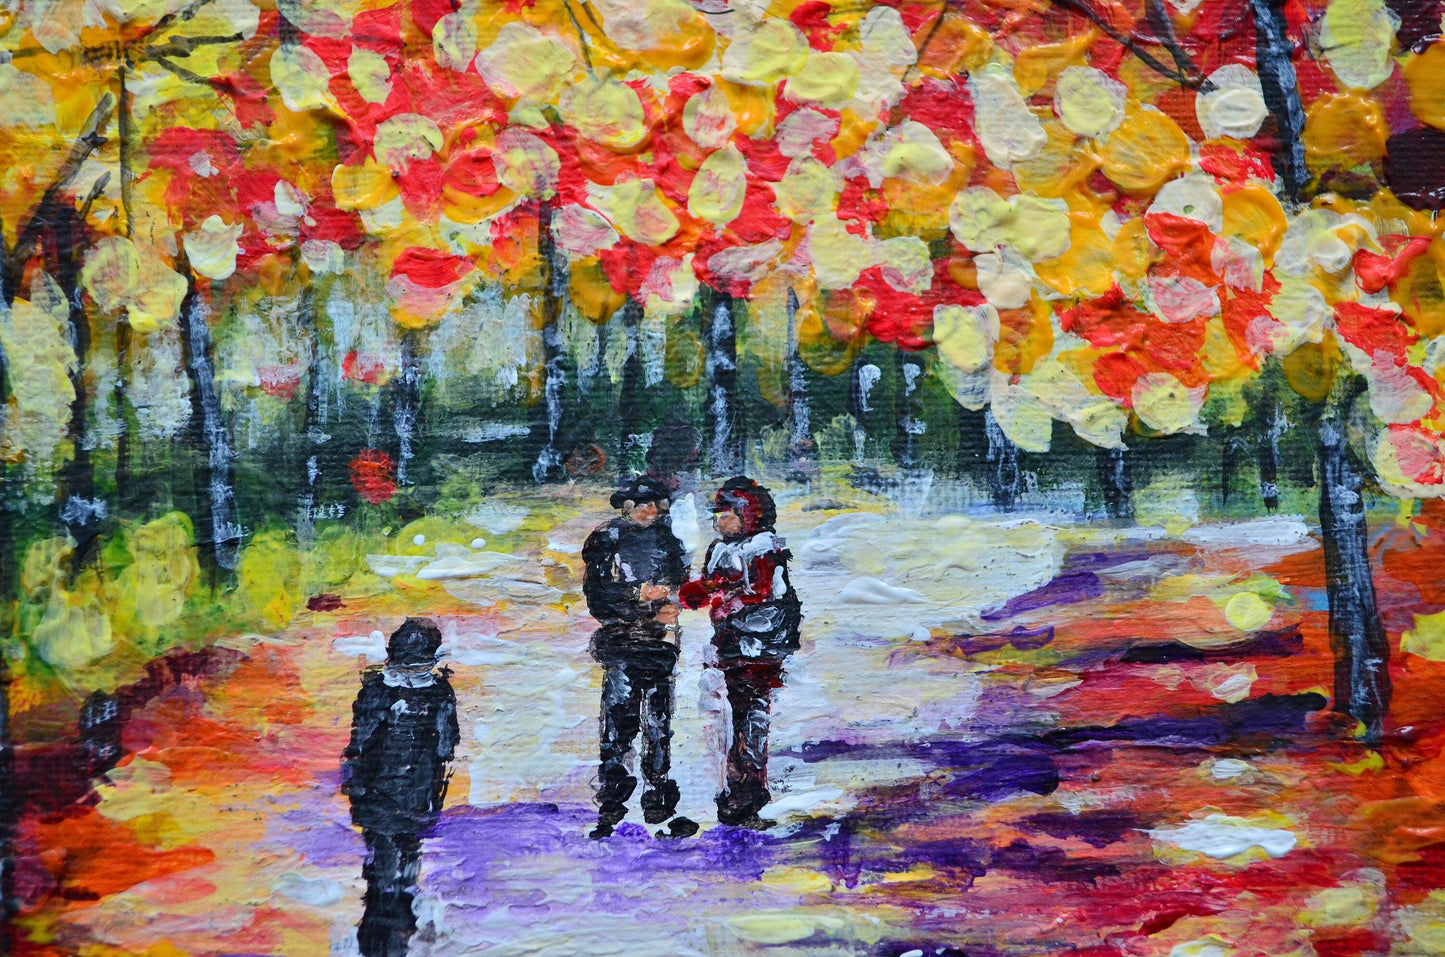 Rainy Autumn Evening in The Park acrylic palette knife painting